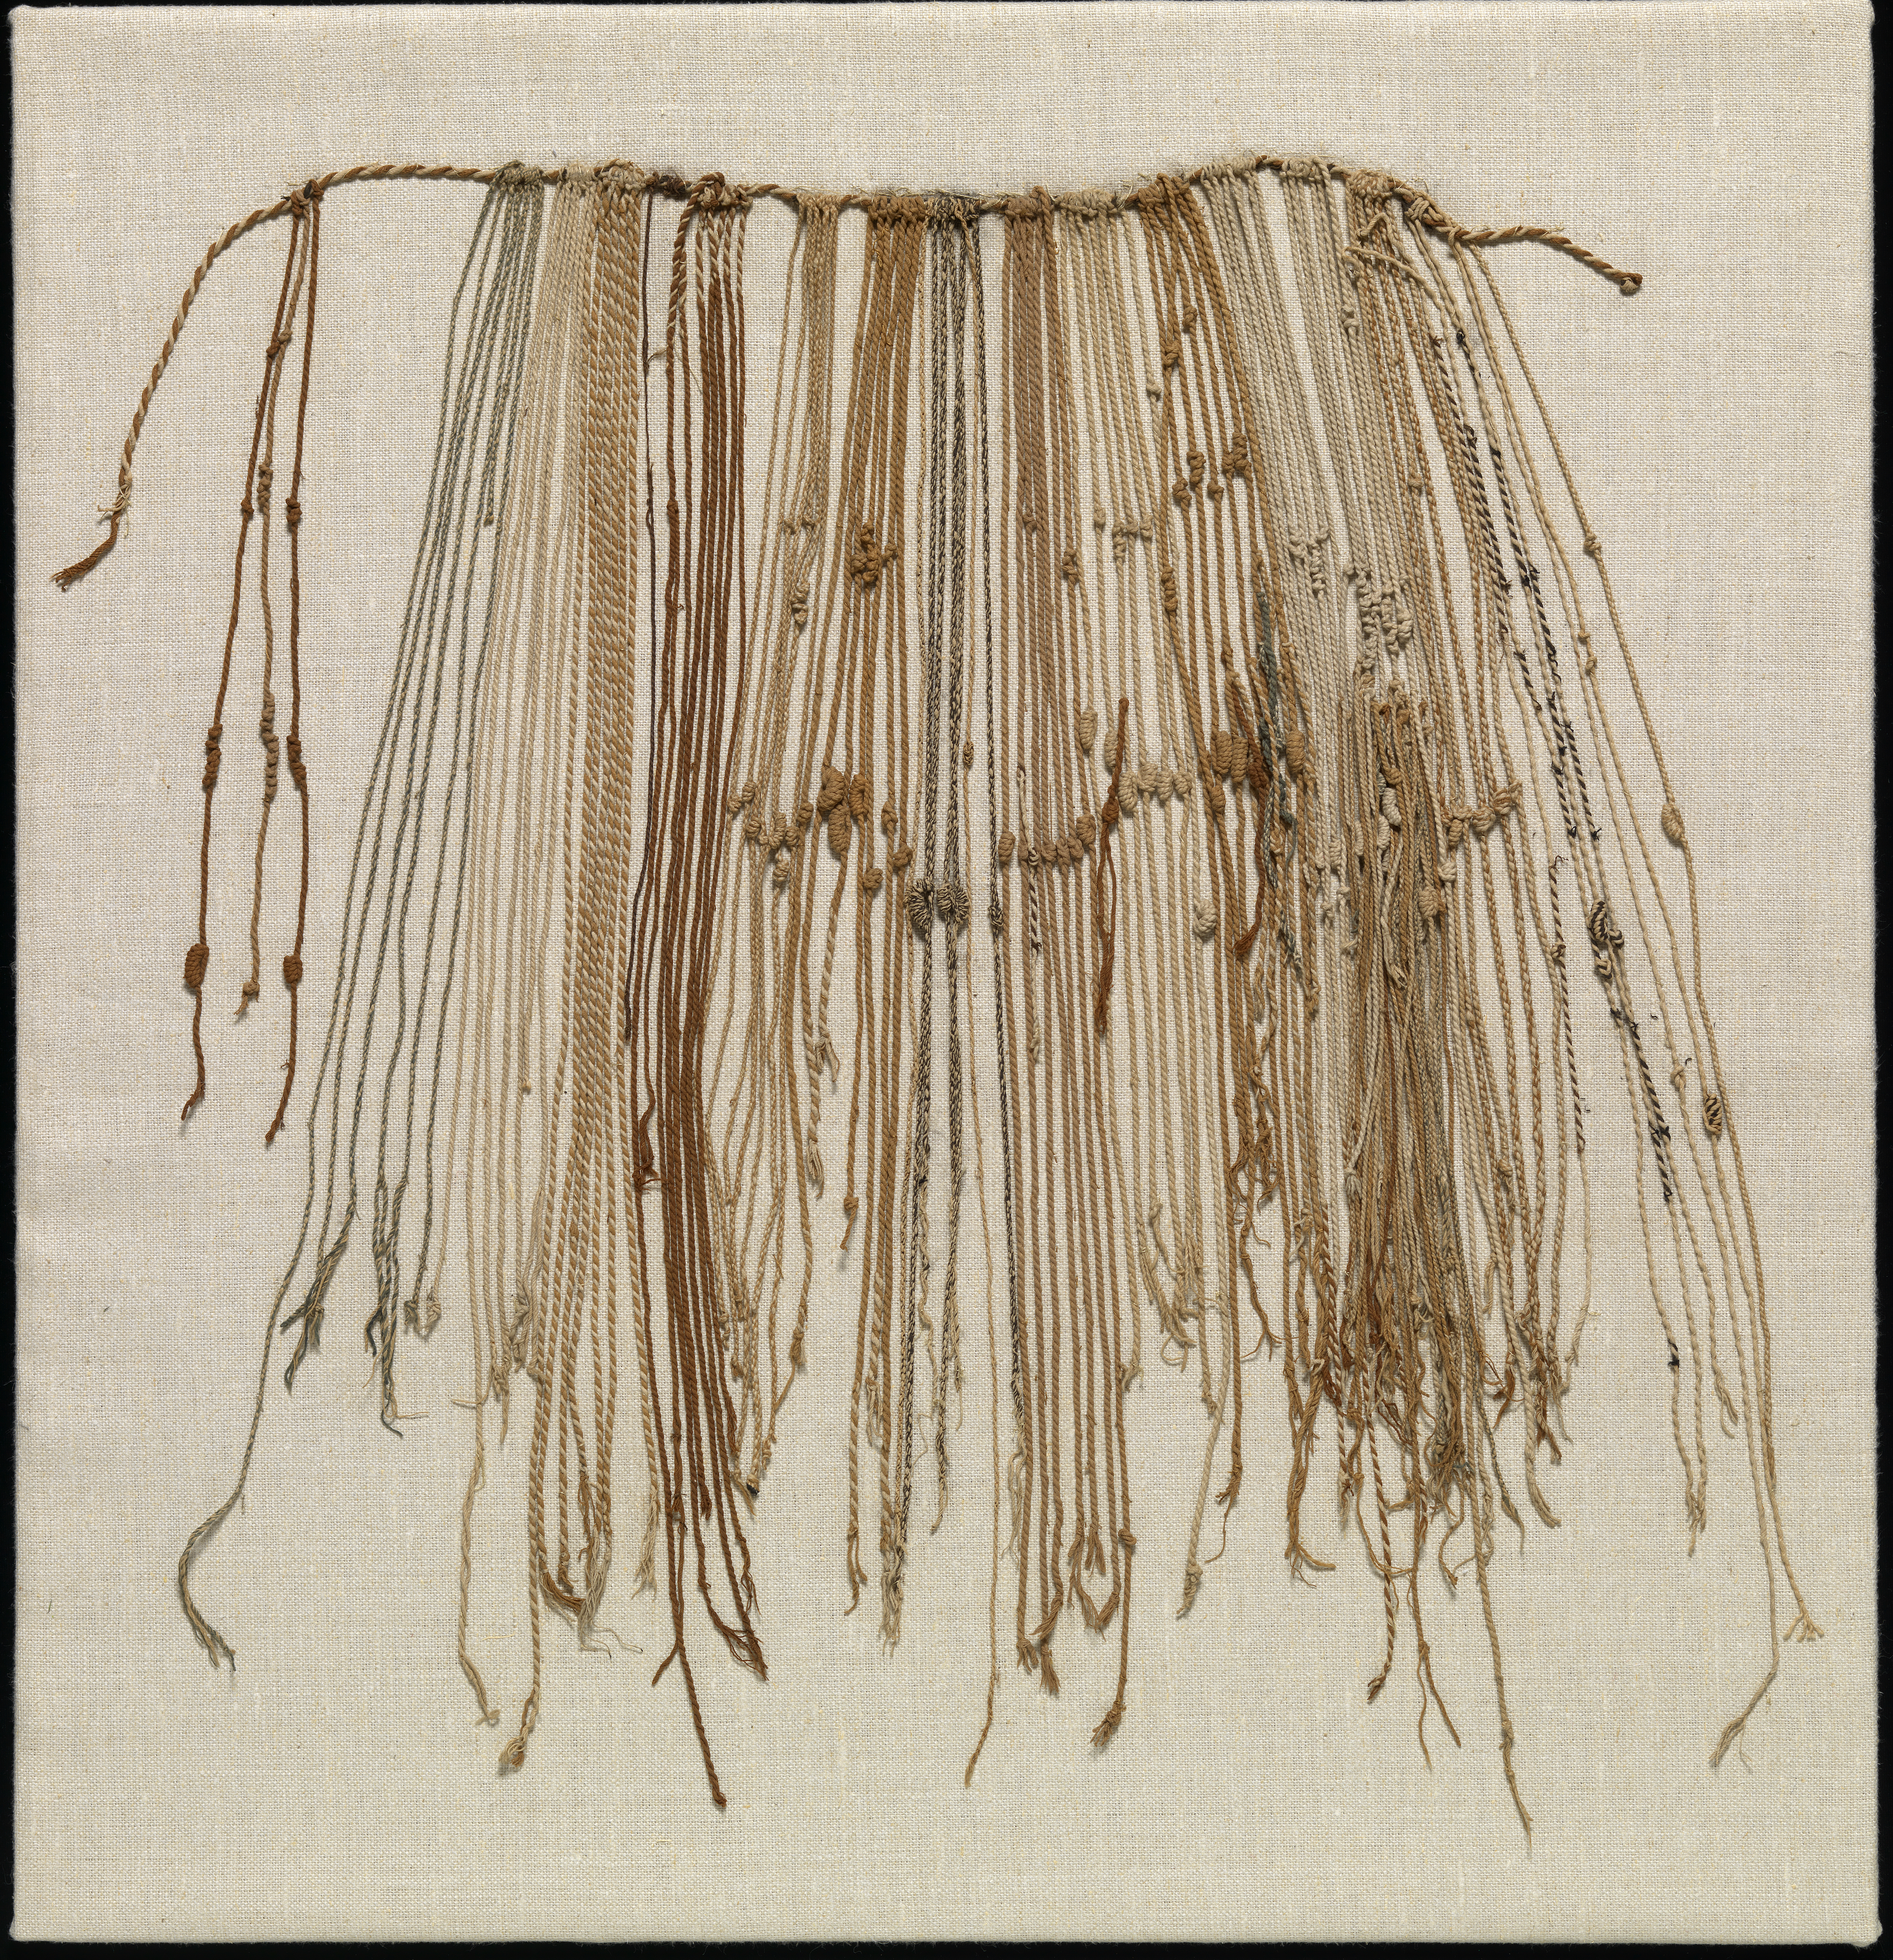 Quipu/Counting record